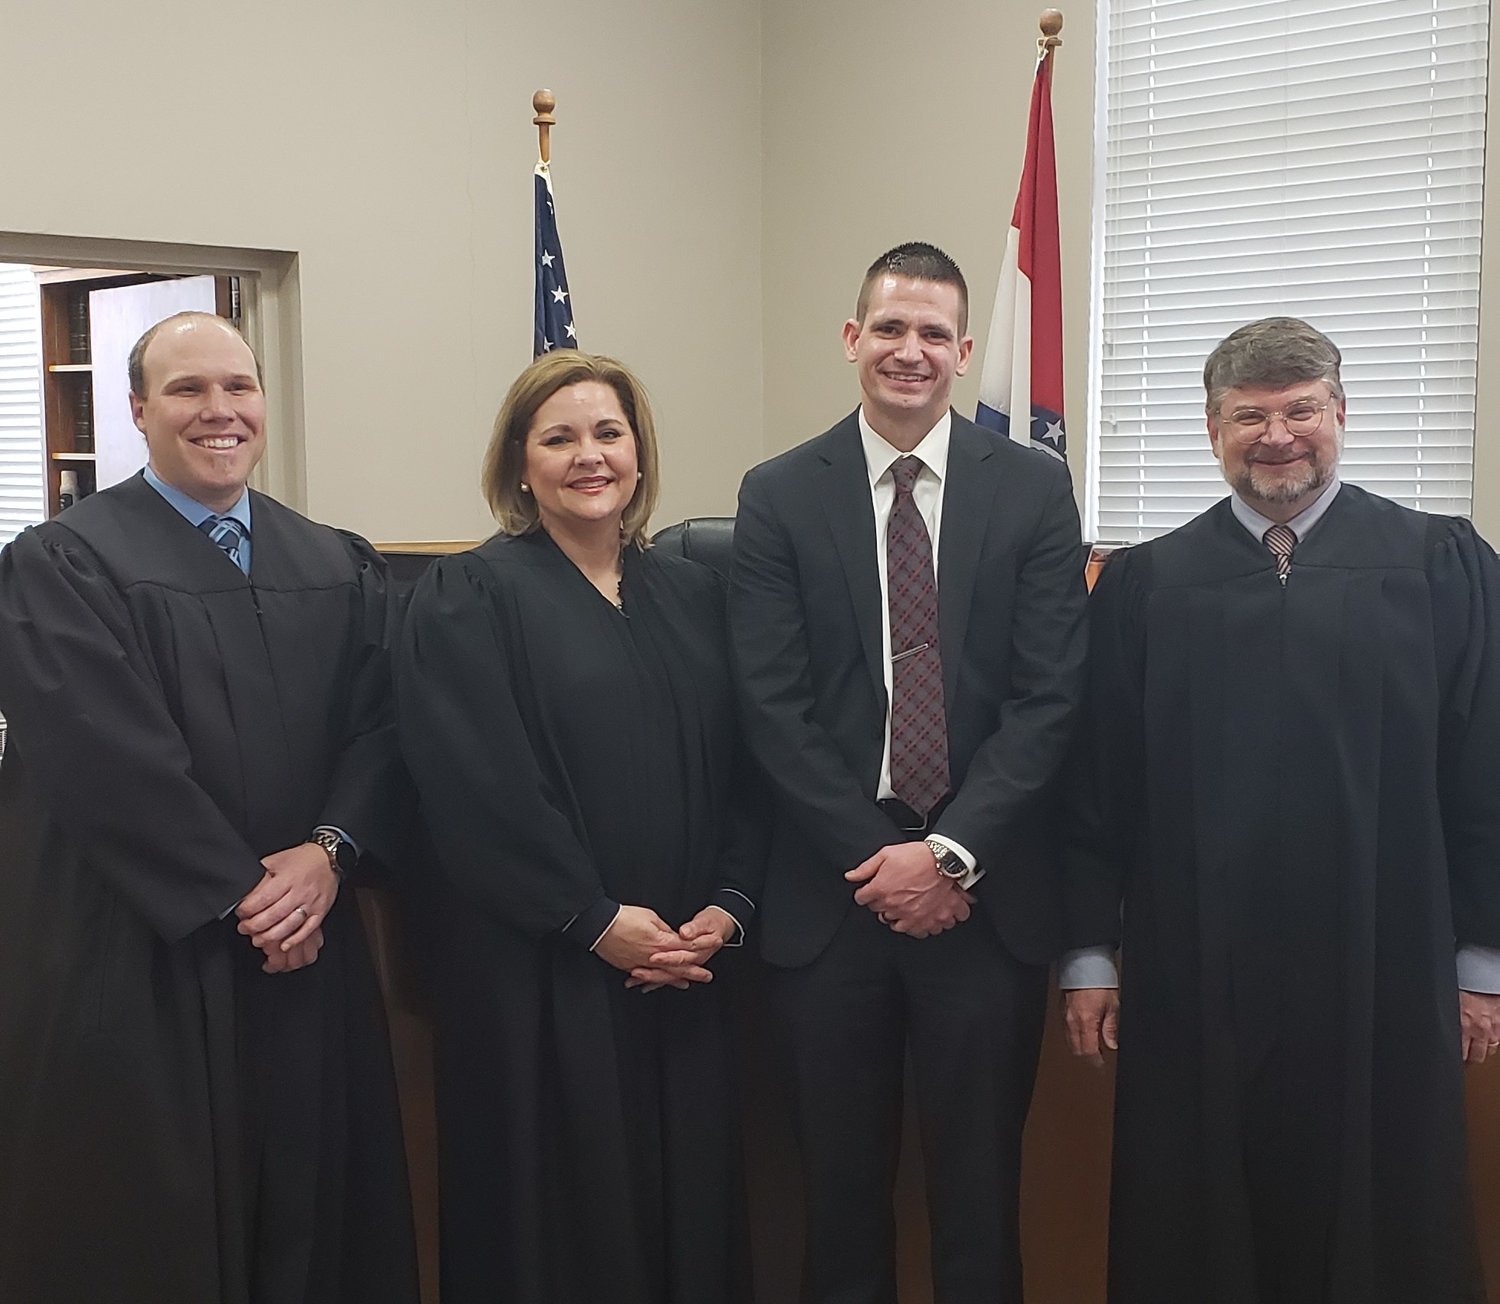 Wellsville-Middletown graduate Keith Freie was appointed as interim prosecuting attorney for Montgomery County during an oath ceremony on April 15. Pictured, from left, are Associate Circuit Judge Nathan Carroz, Judge Kelly Broniec of the Missouri Court of Appeals for the Eastern District, Freie and Circuit Judge Jason Lamb.